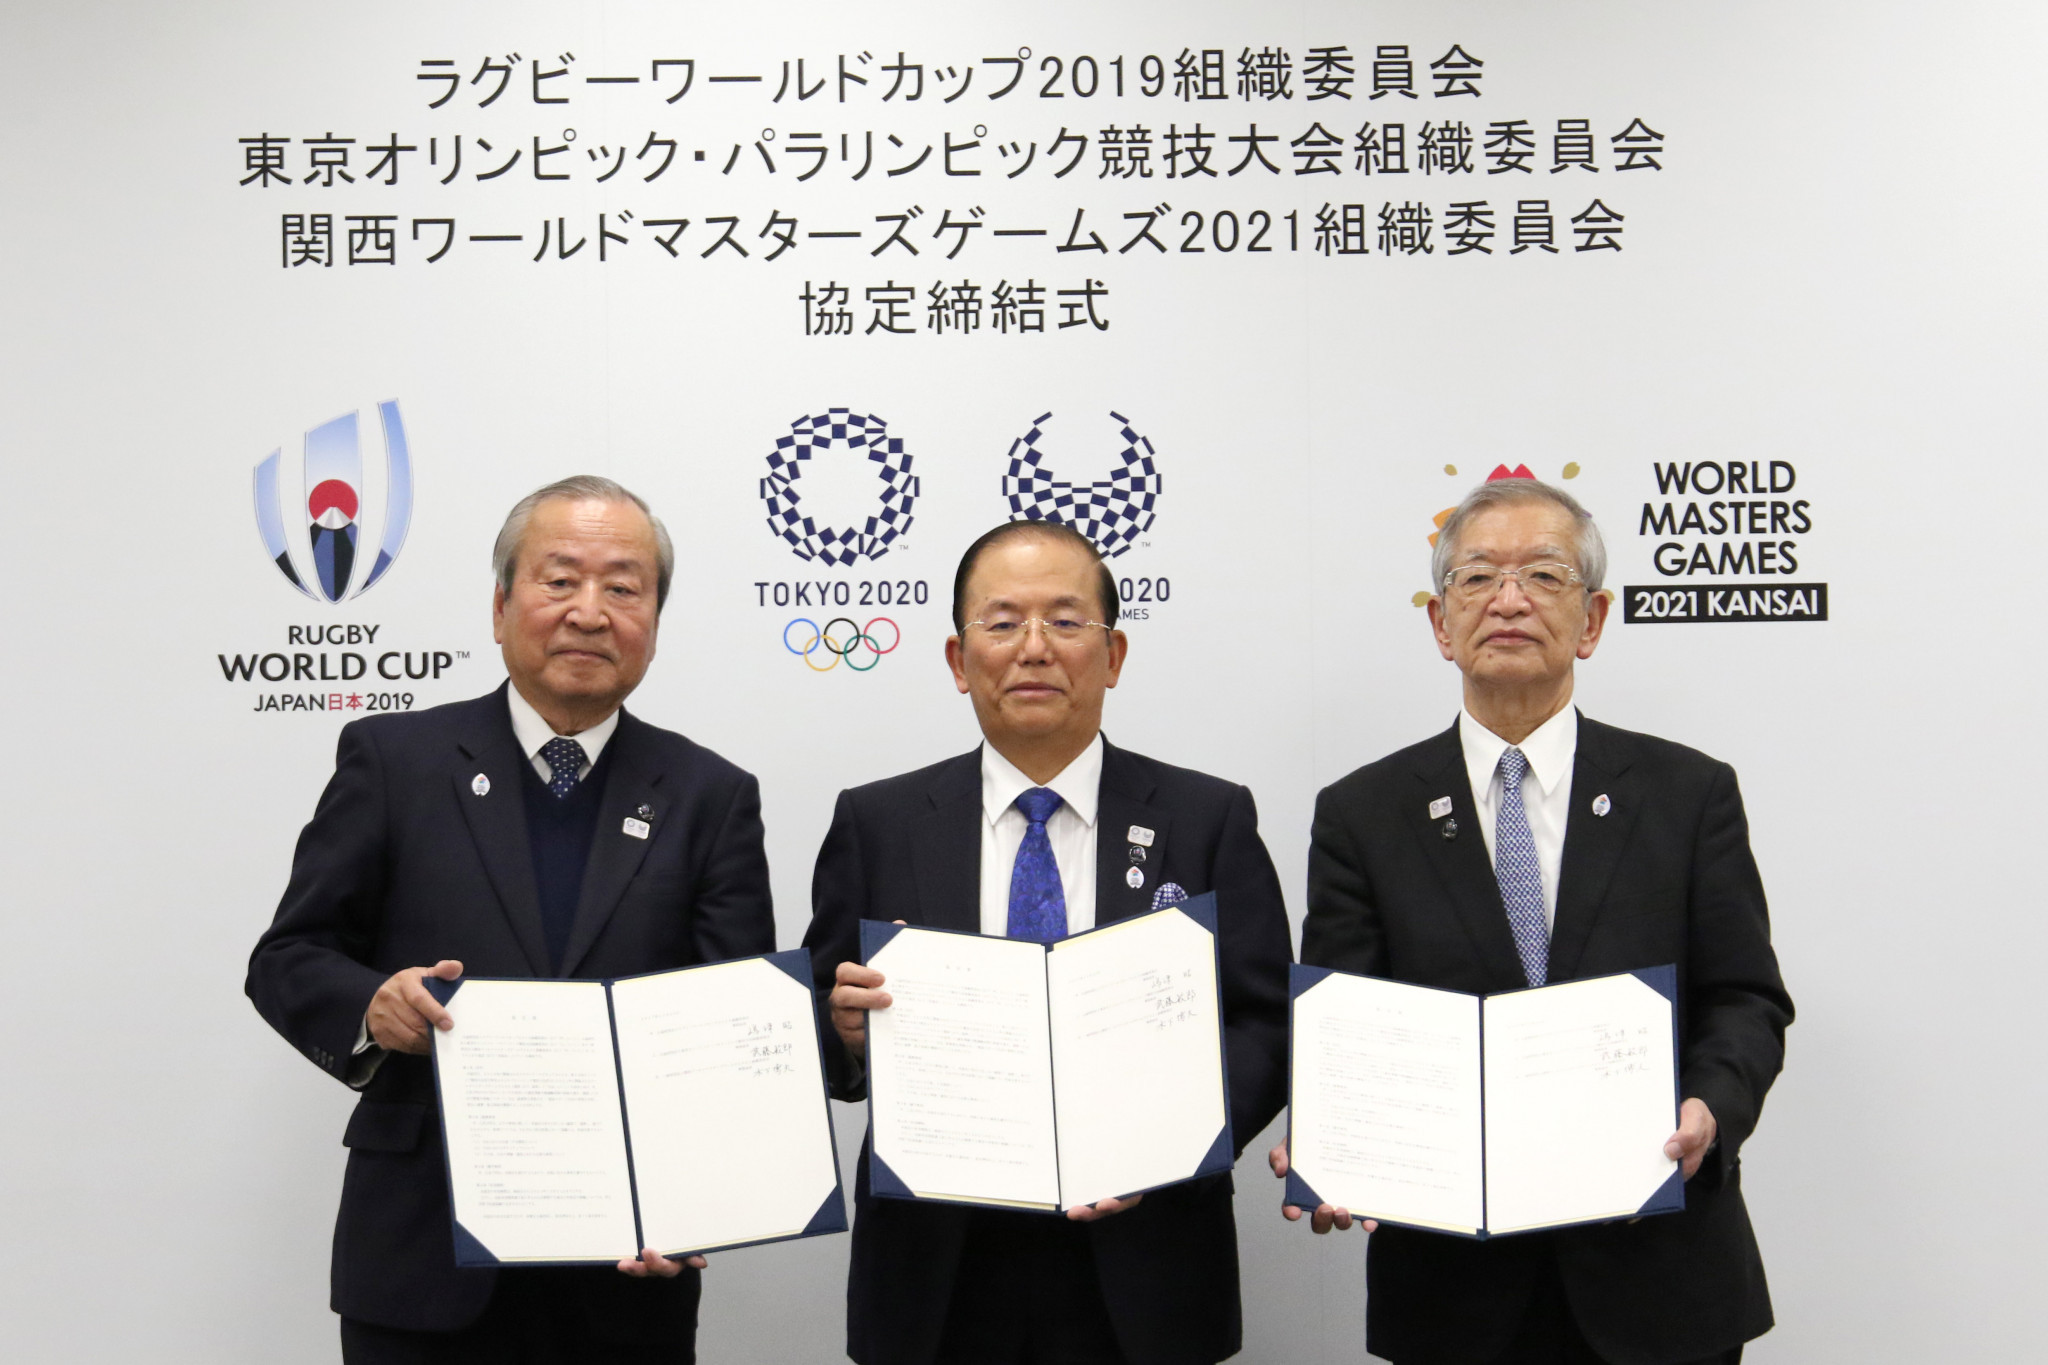 Tokyo 2020 has today entered into a partnership agreement with the 2019 Rugby World Cup and 2021 World Masters Games ©Tokyo 2020